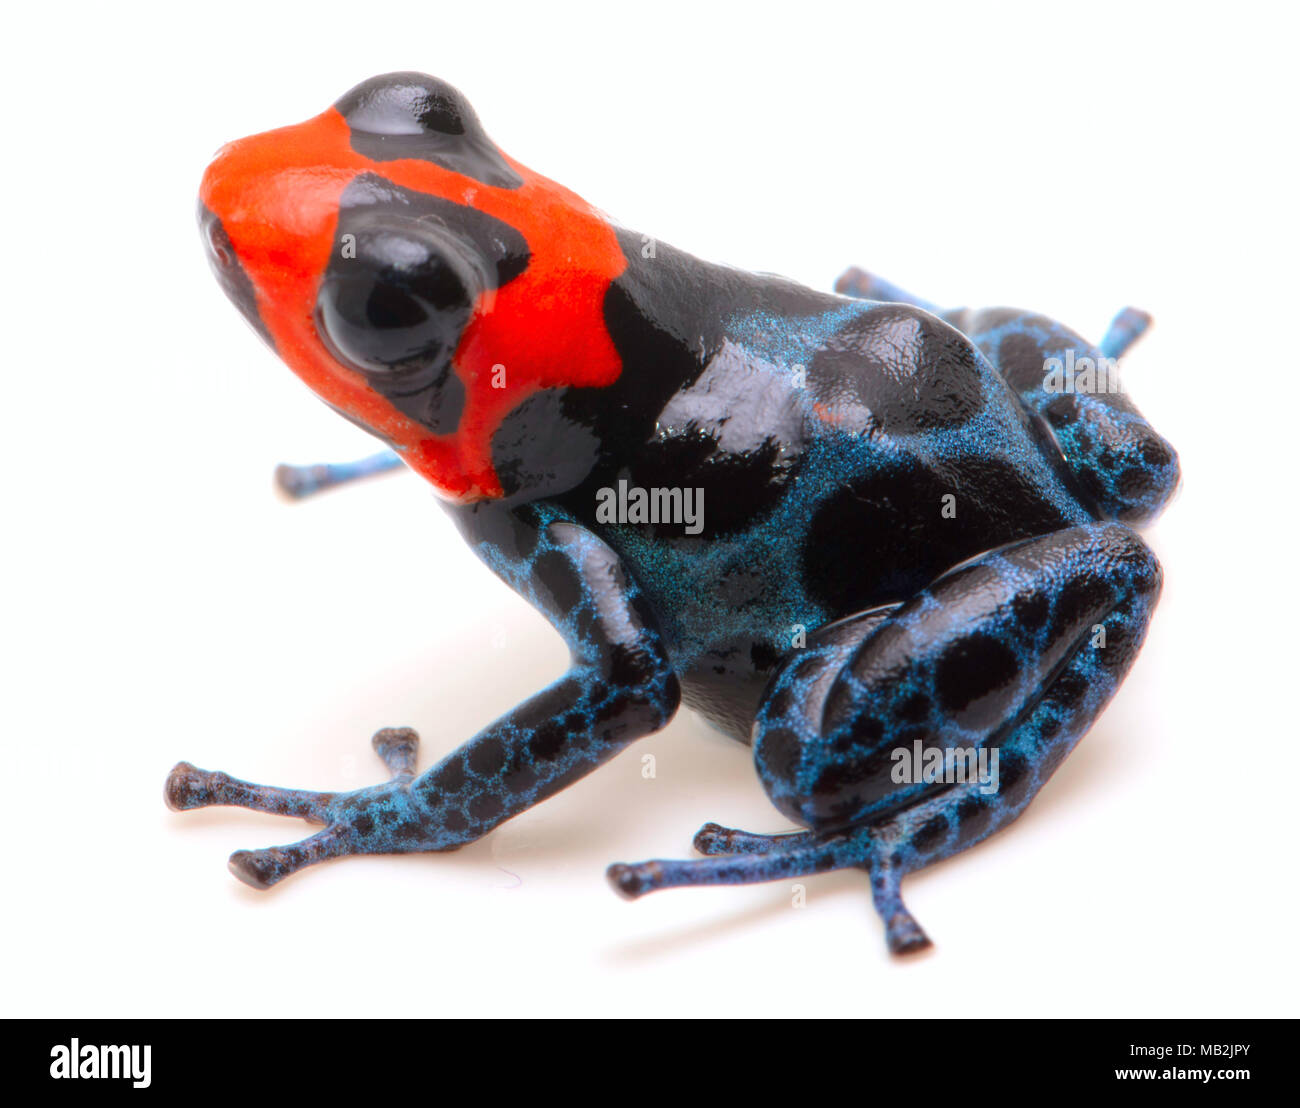 poison dart frog with red head, Ranitomeya benedicta. Poisonous rain forest animal with bright warning colors. Isolated on white background. Stock Photo